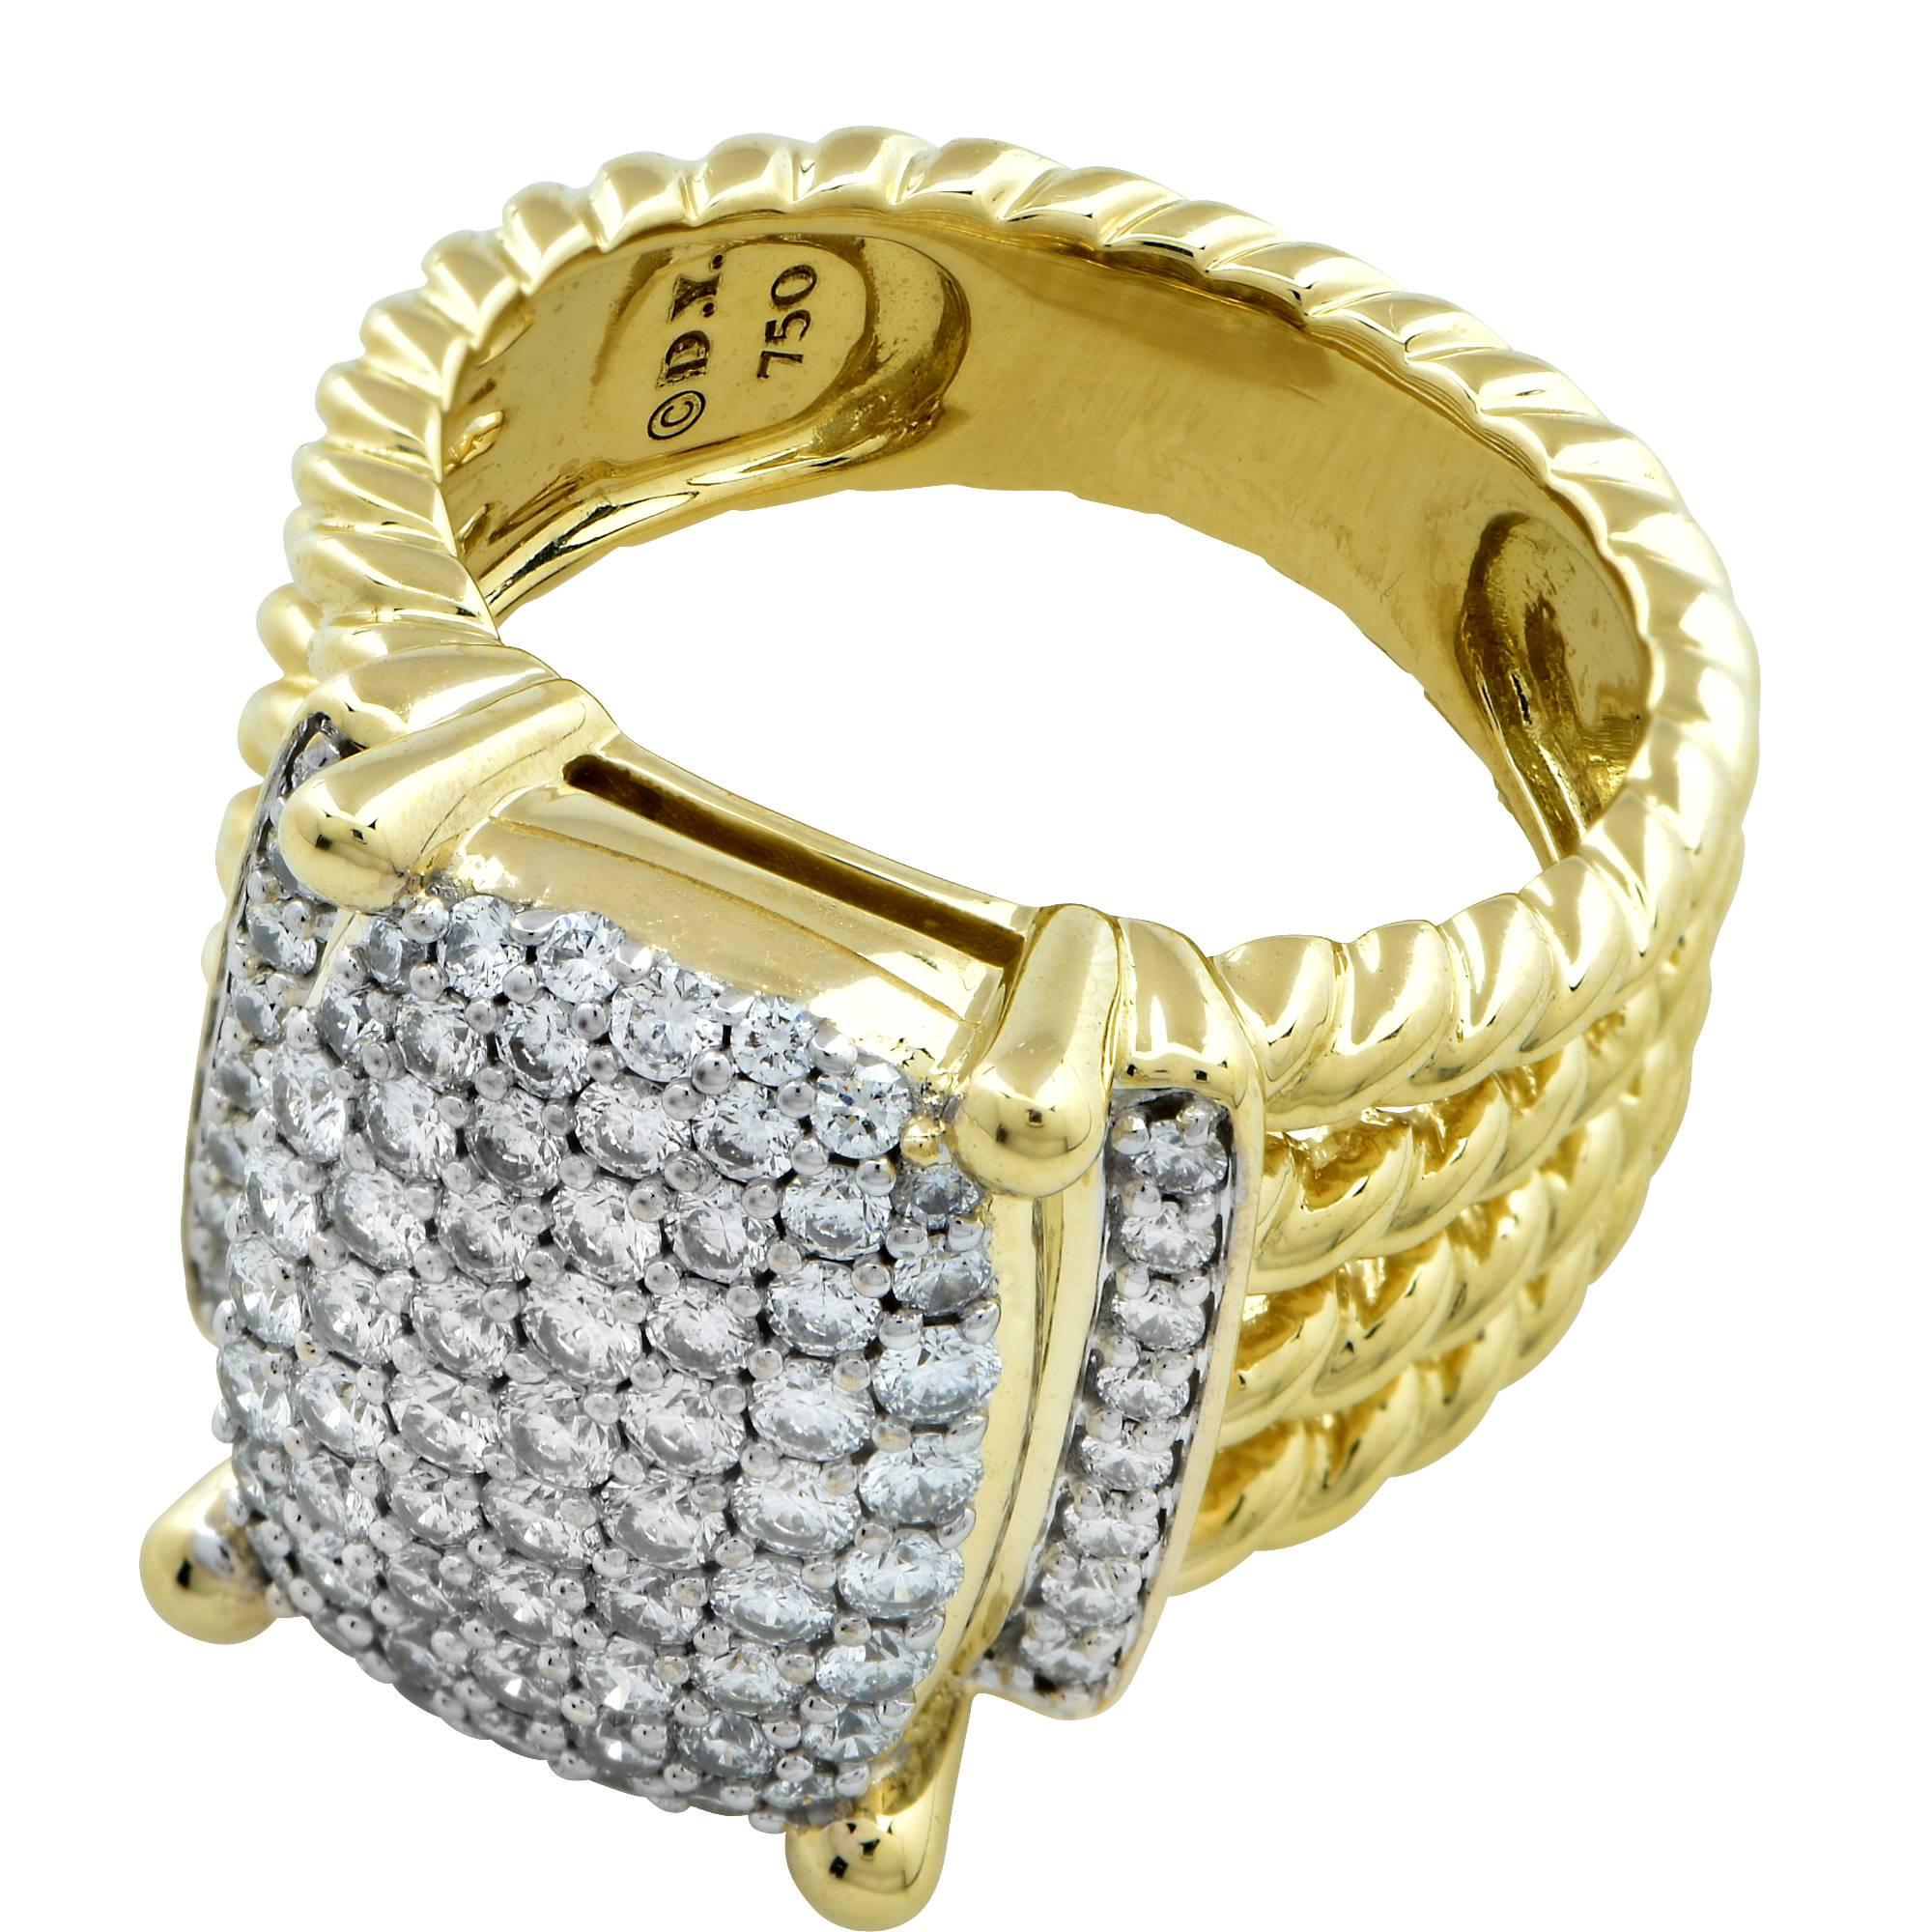 Striking David Yurman Wheaton ring with Diamonds in 18K Yellow Gold. This gorgeous ring has a face measuring 16mm by 12mm pave’ set with 80 diamonds weighing 1.13 ctw. The band of the ring consists of four twisted yellow gold rope bands, inspired by